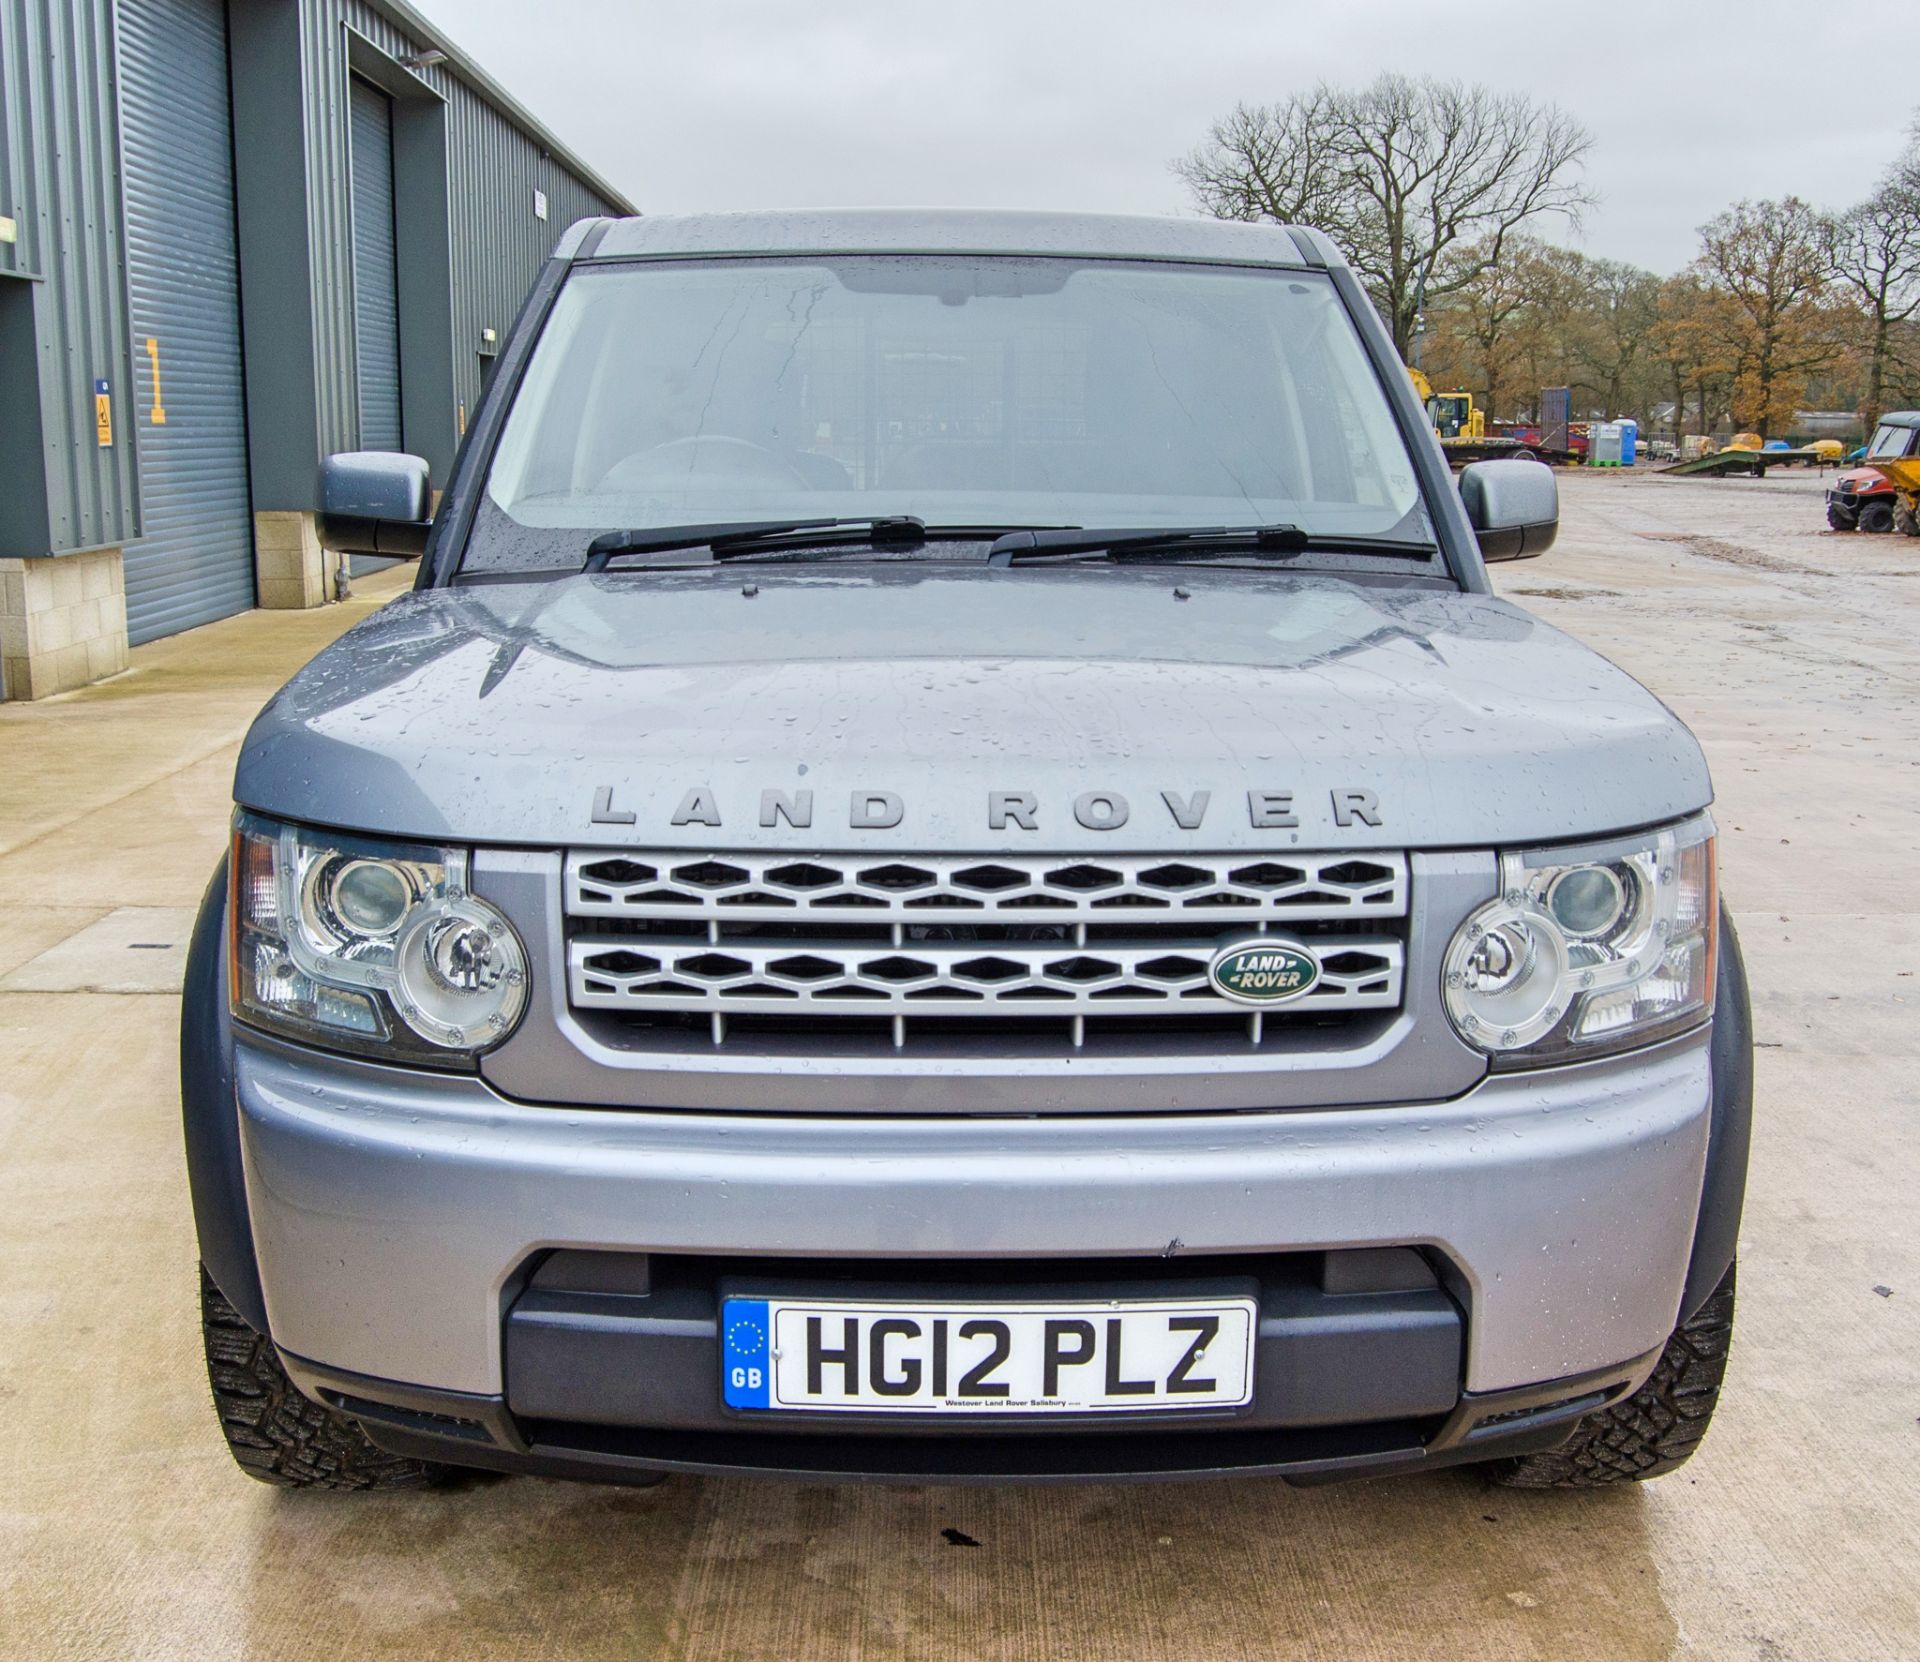 Land Rover Discovery 4 Commercial 2993cc TDV6 Auto light goods vehicle Registration Number: HG12 PLZ - Image 5 of 42